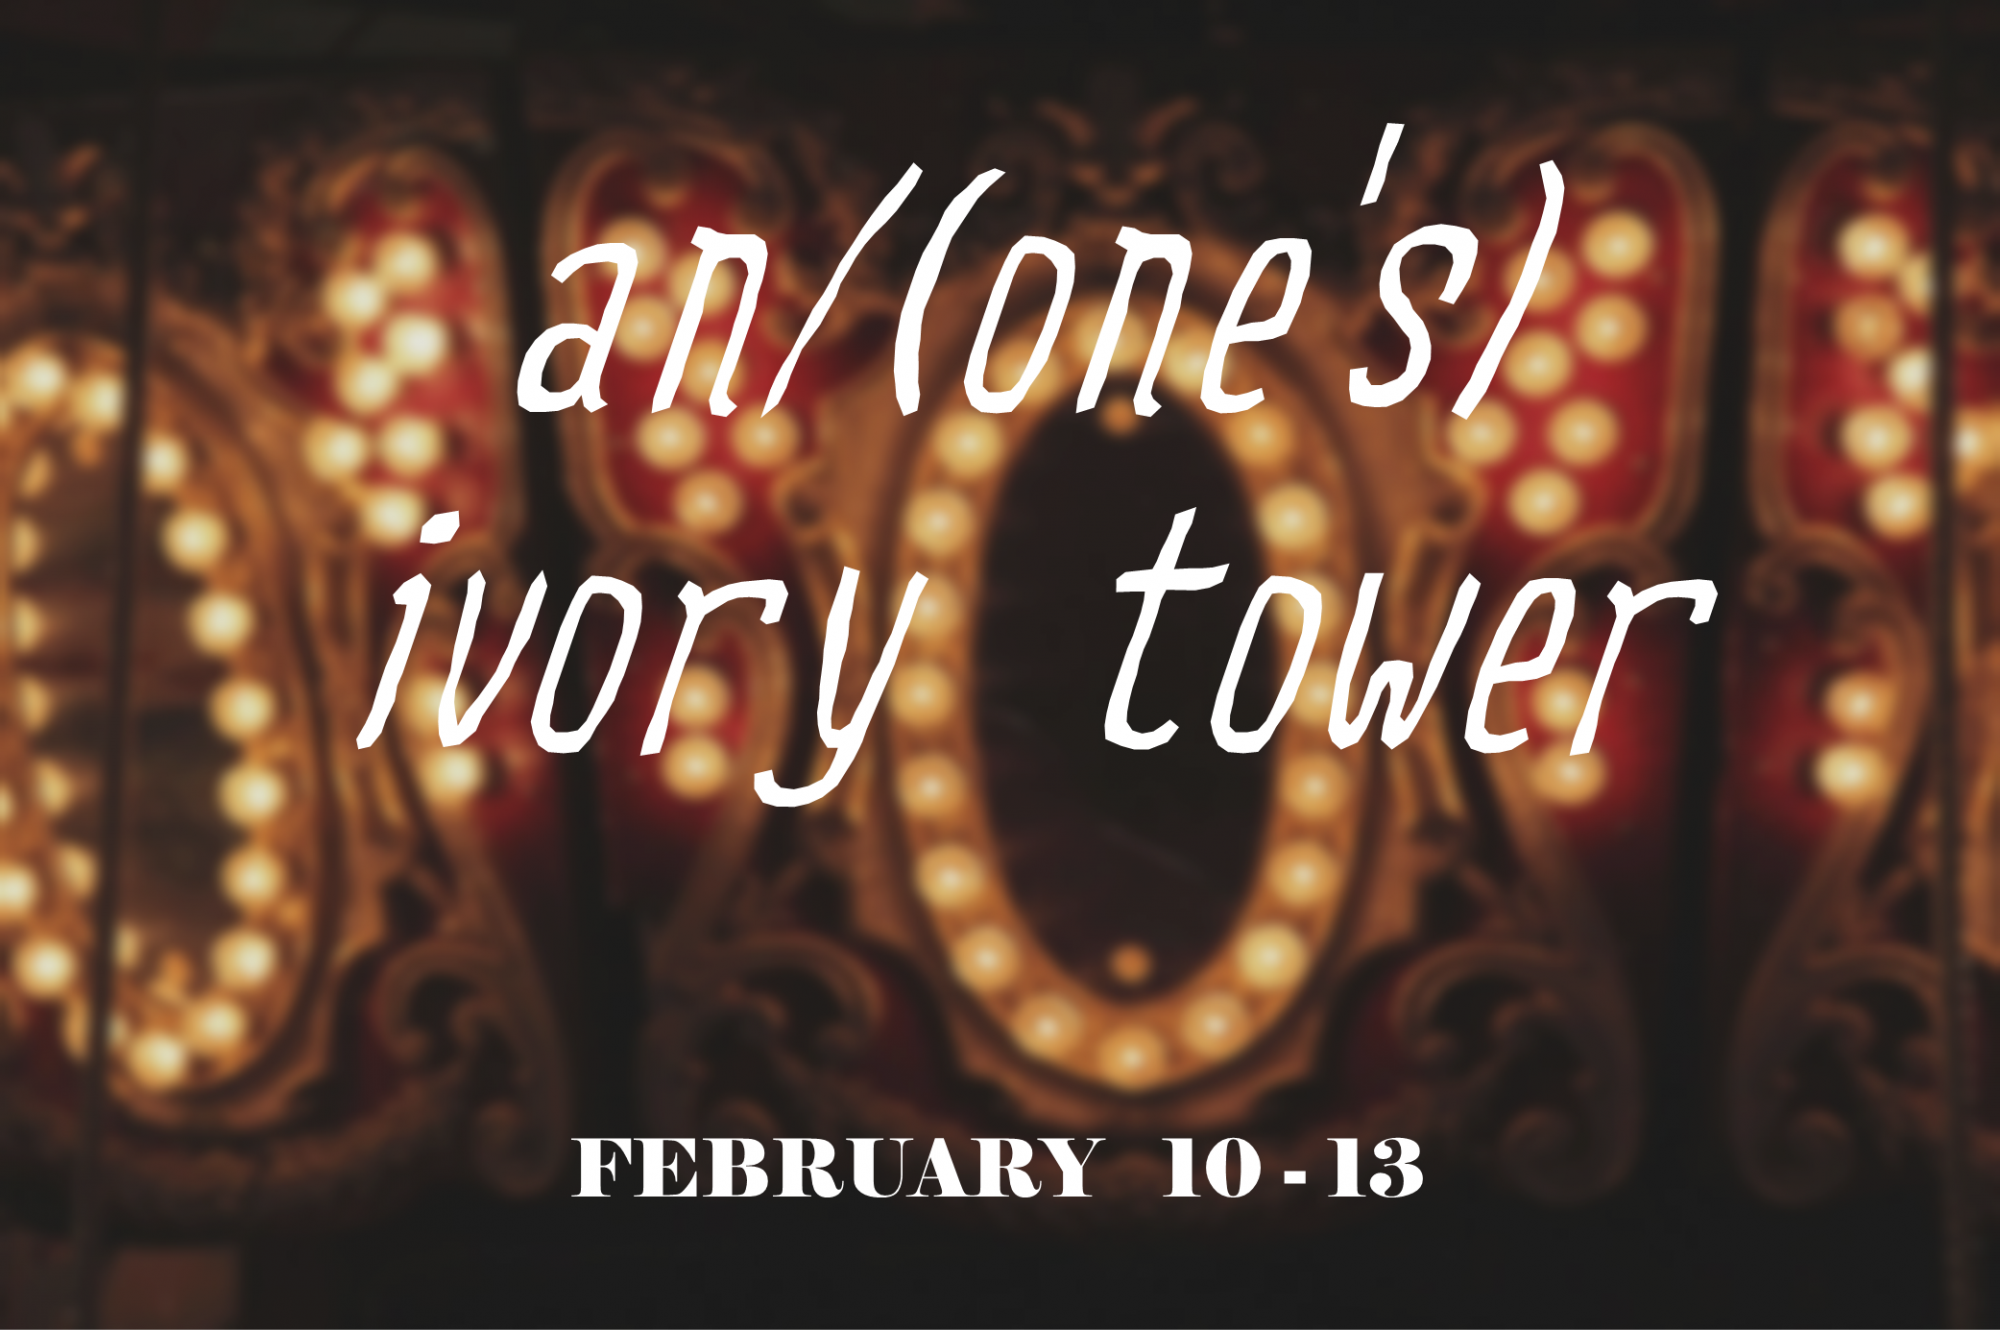 an/(one's) ivory tower